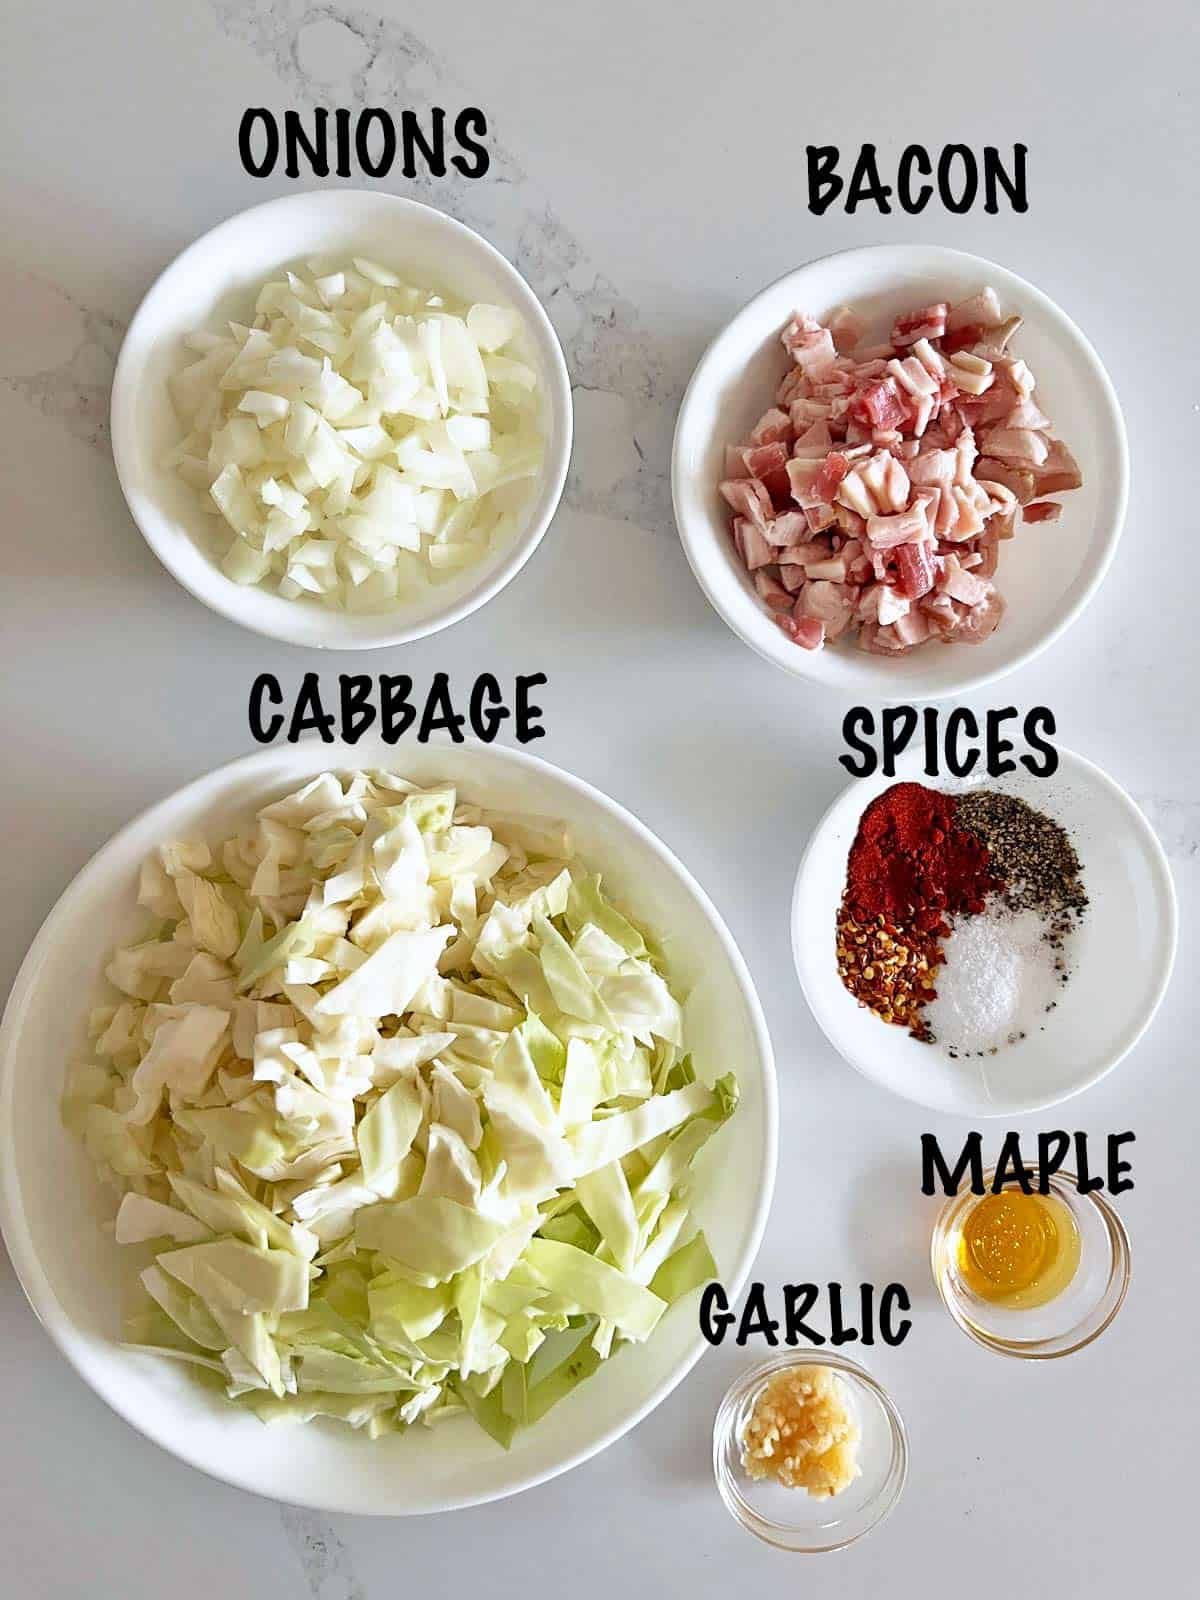 The ingredients needed to make fried cabbage.